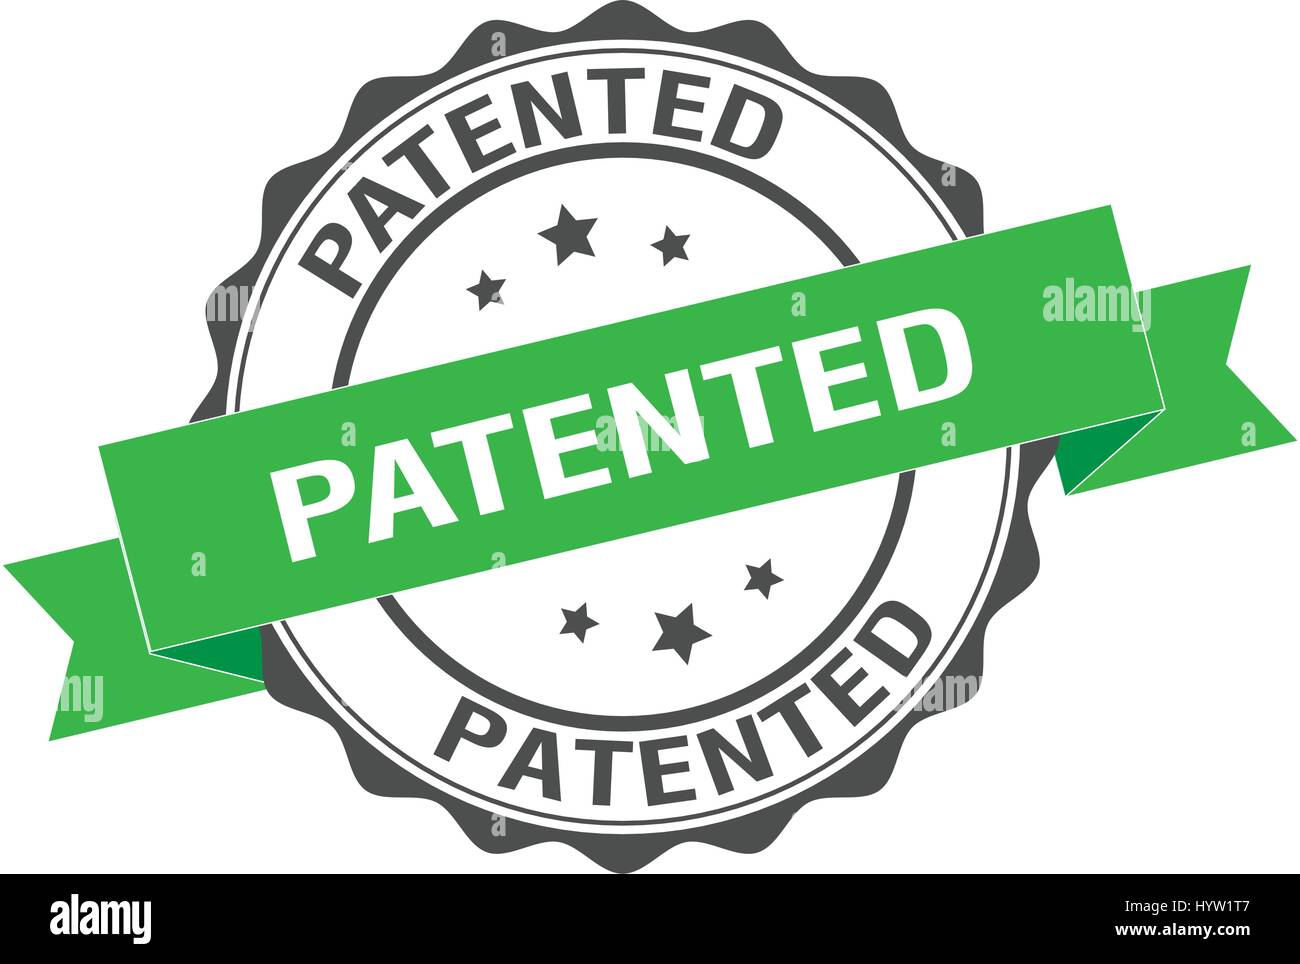 Patented stamp illustration Stock Vector